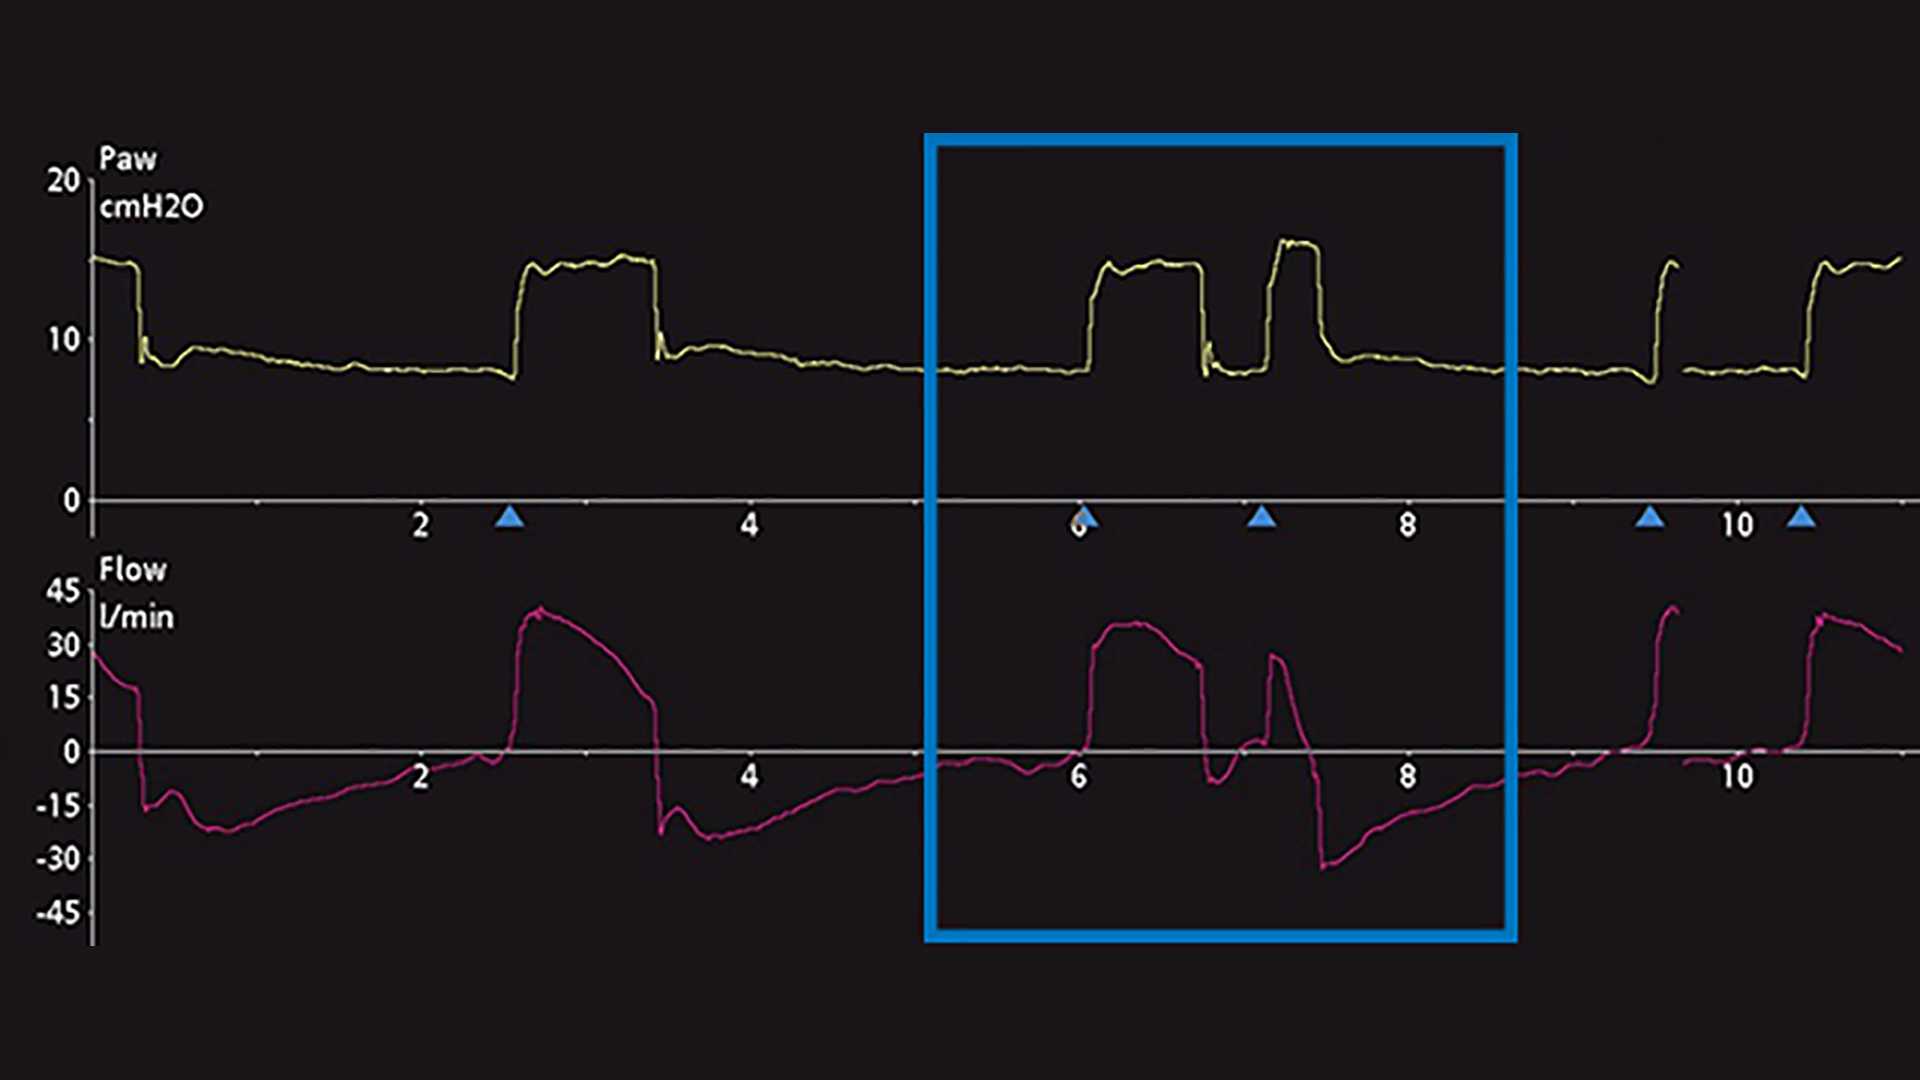 Pressure and flow waveforms showing double triggering